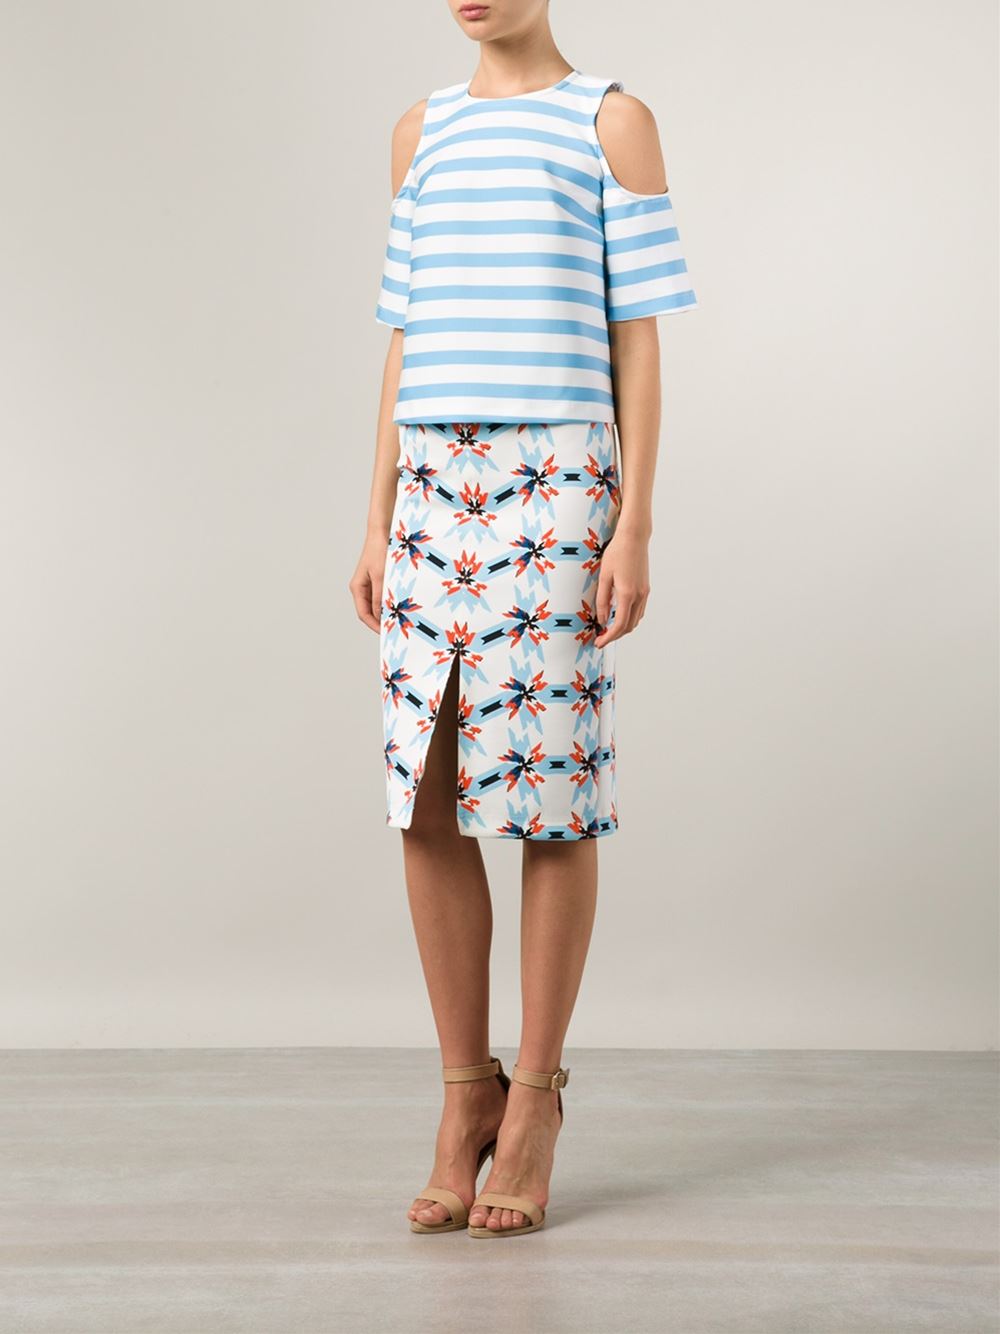 Monday Obsession: Tanya Taylor Skirt and Top Is the Perfect Spring Outfit - Philadelphia Magazine